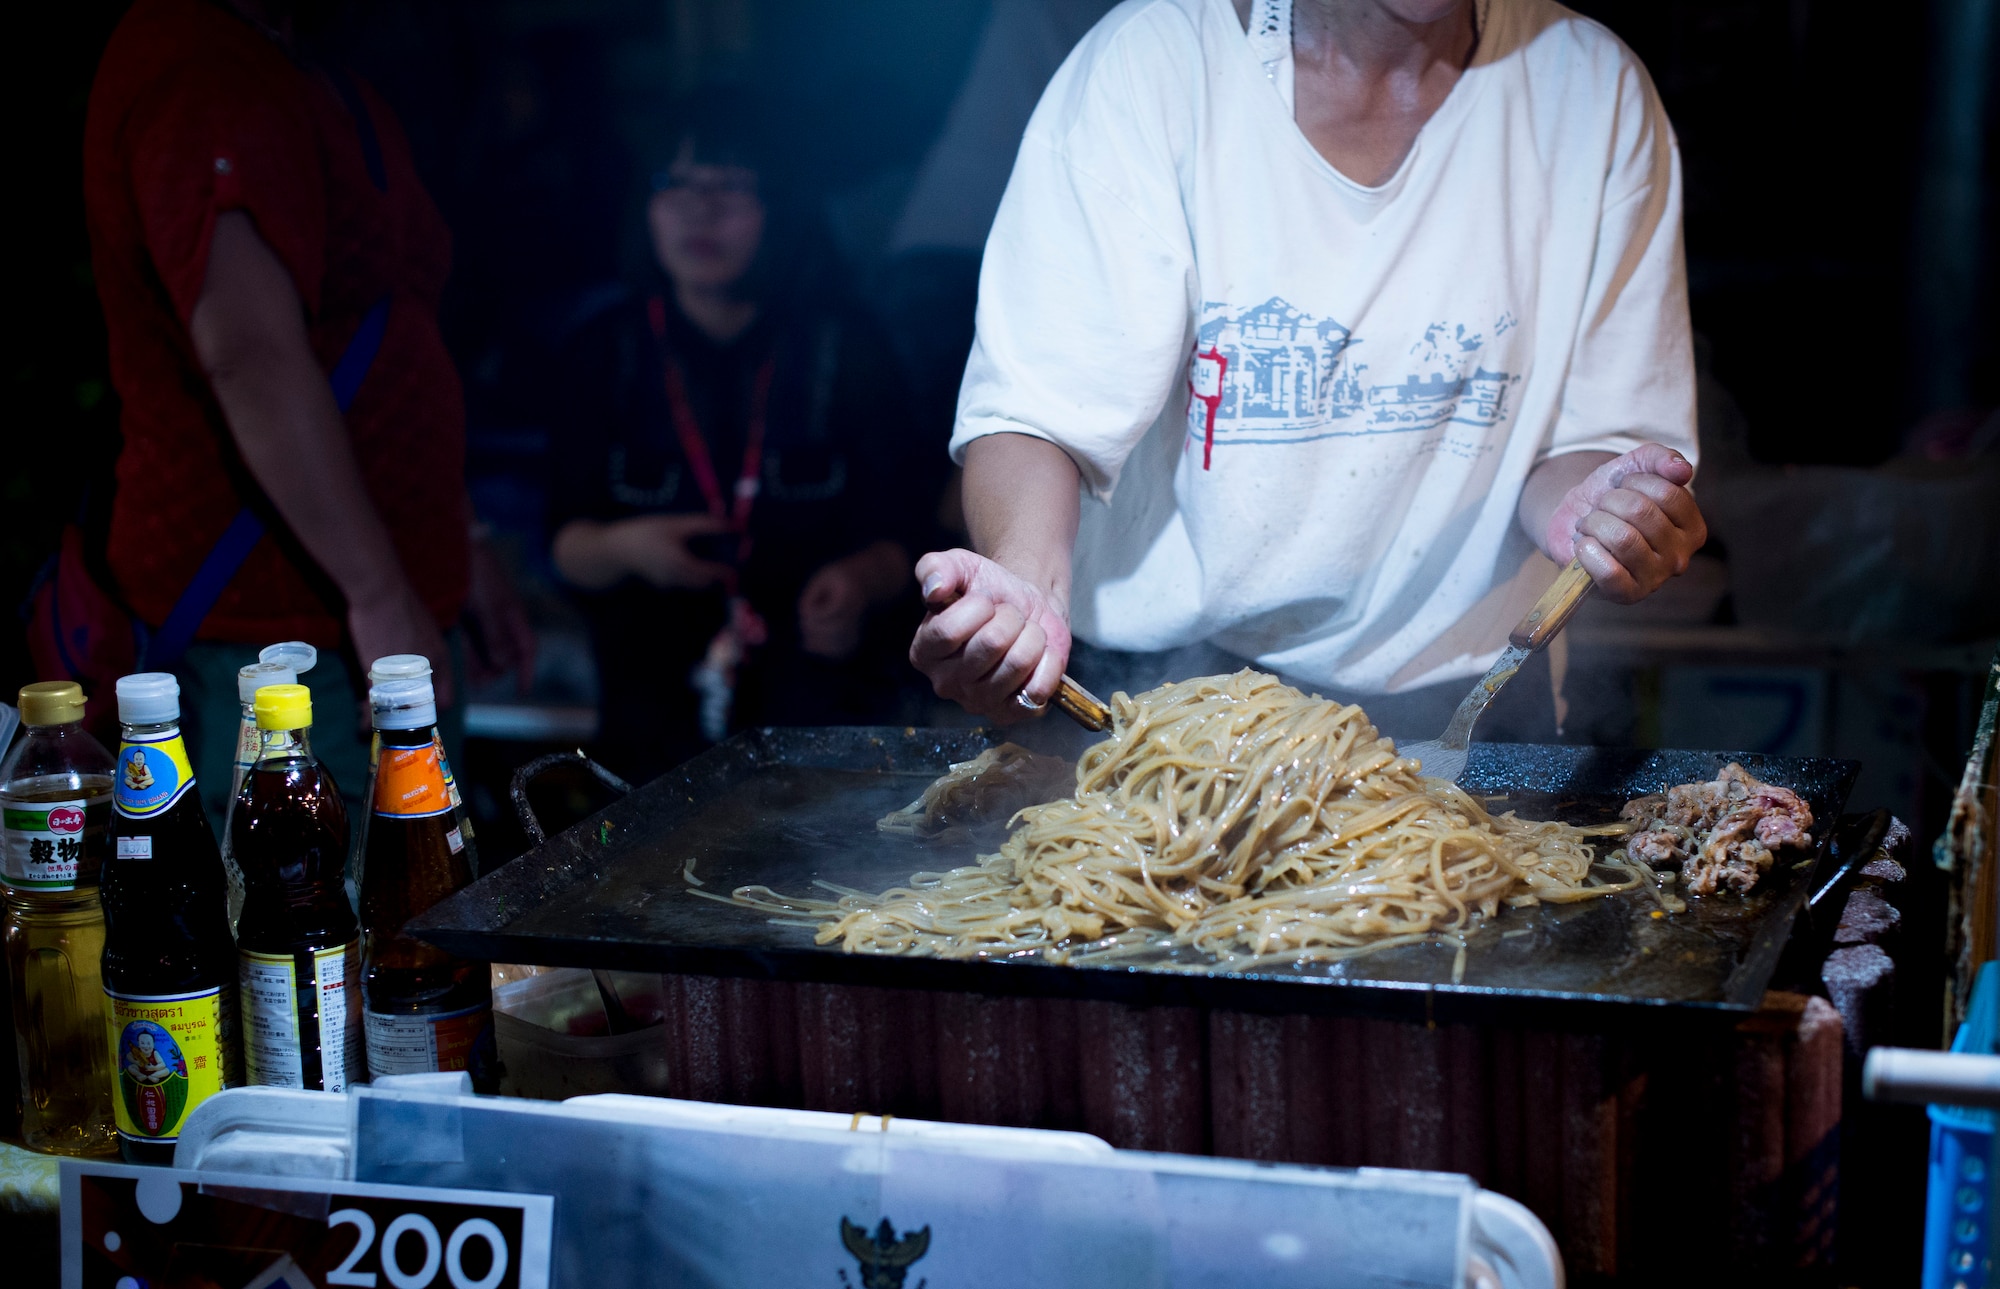 A street vendor cooks noodles at the Fussa Tanabata Festival in Fussa City, Japan, Aug. 8, 2013. Vendors featuring a variety of foods lined the streets for festival participants to enjoy.  (U.S. Air Force photo by Airman 1st Class Meagan Schutter/Released)